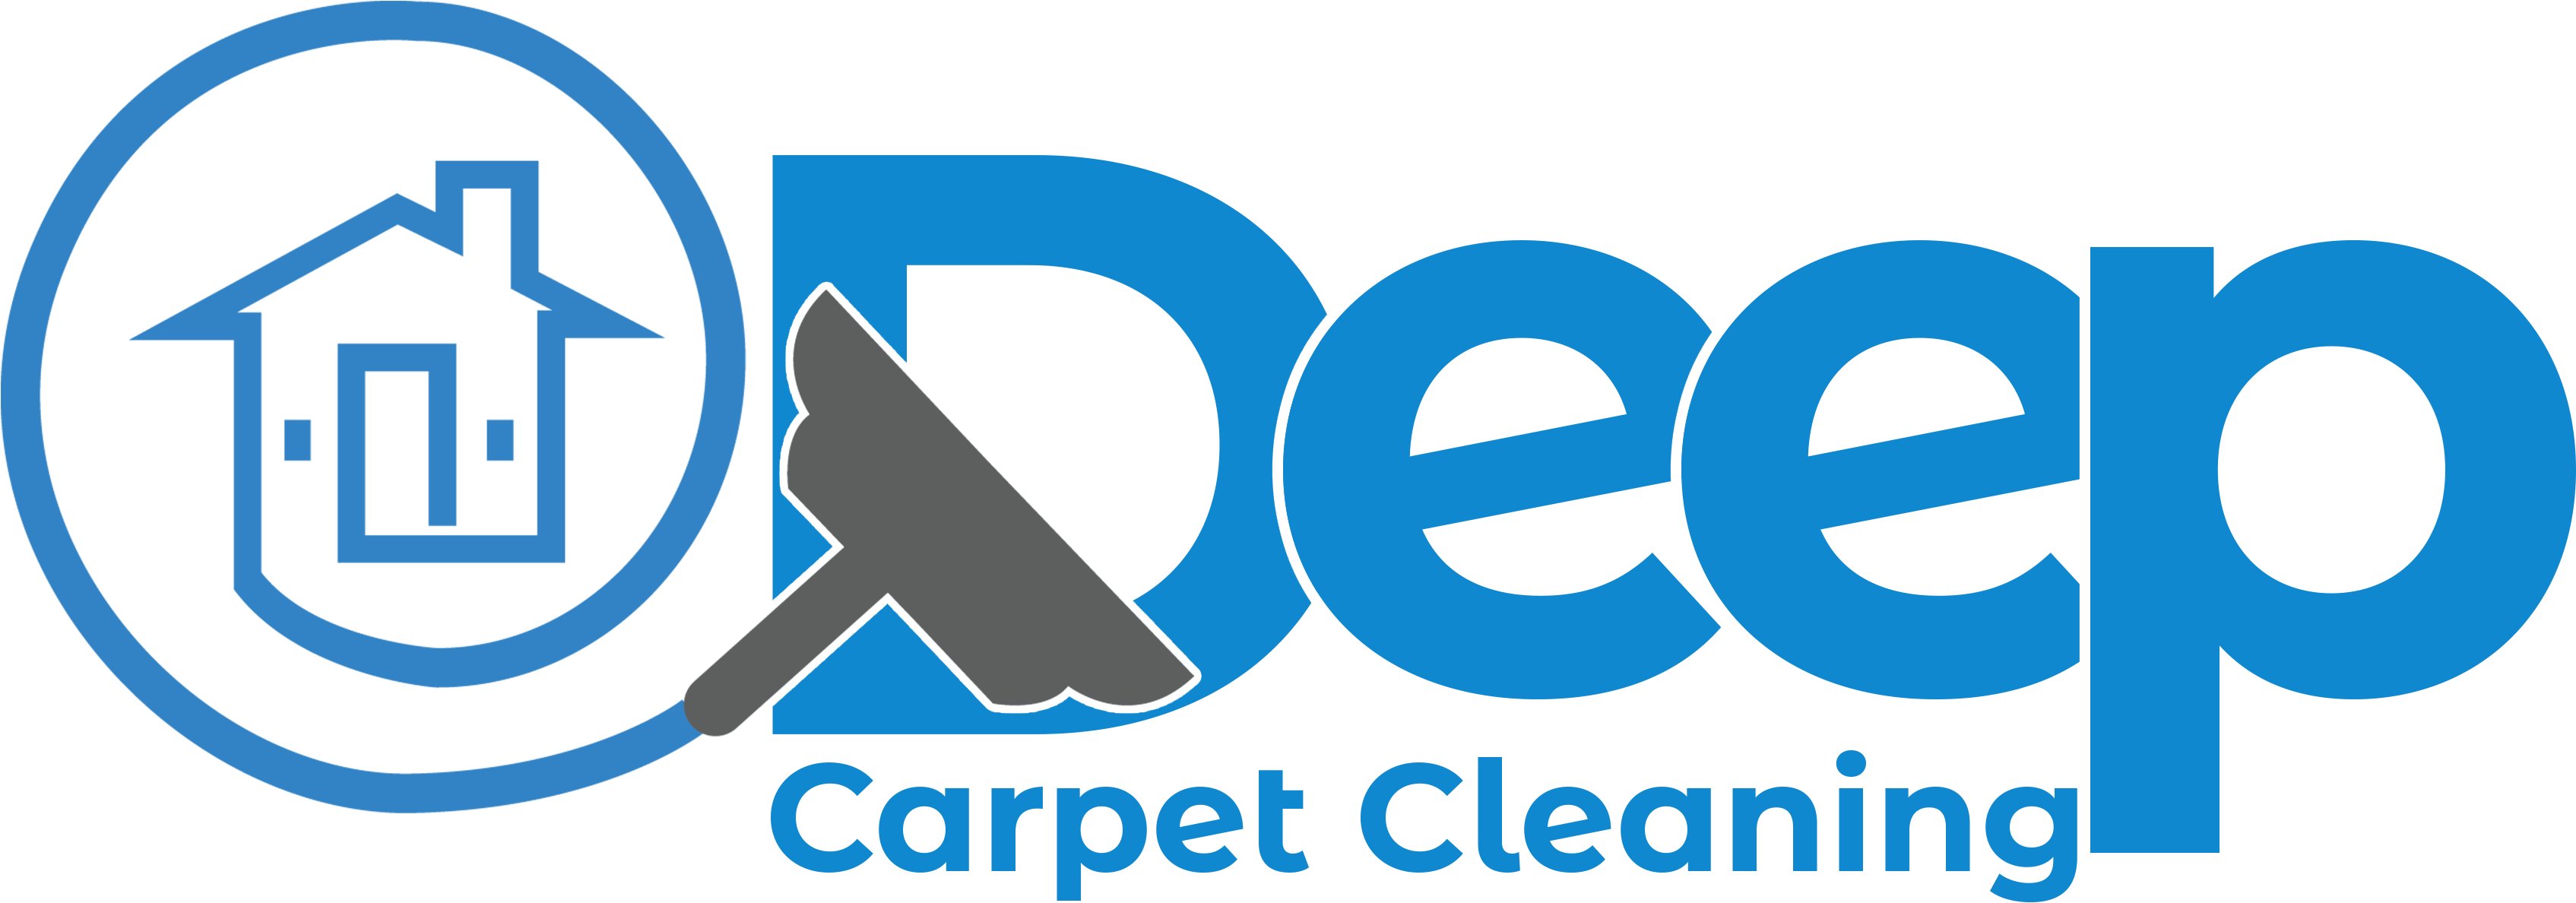 Deep Carpet Cleaning - Carpet Cleaning (3400x1200)